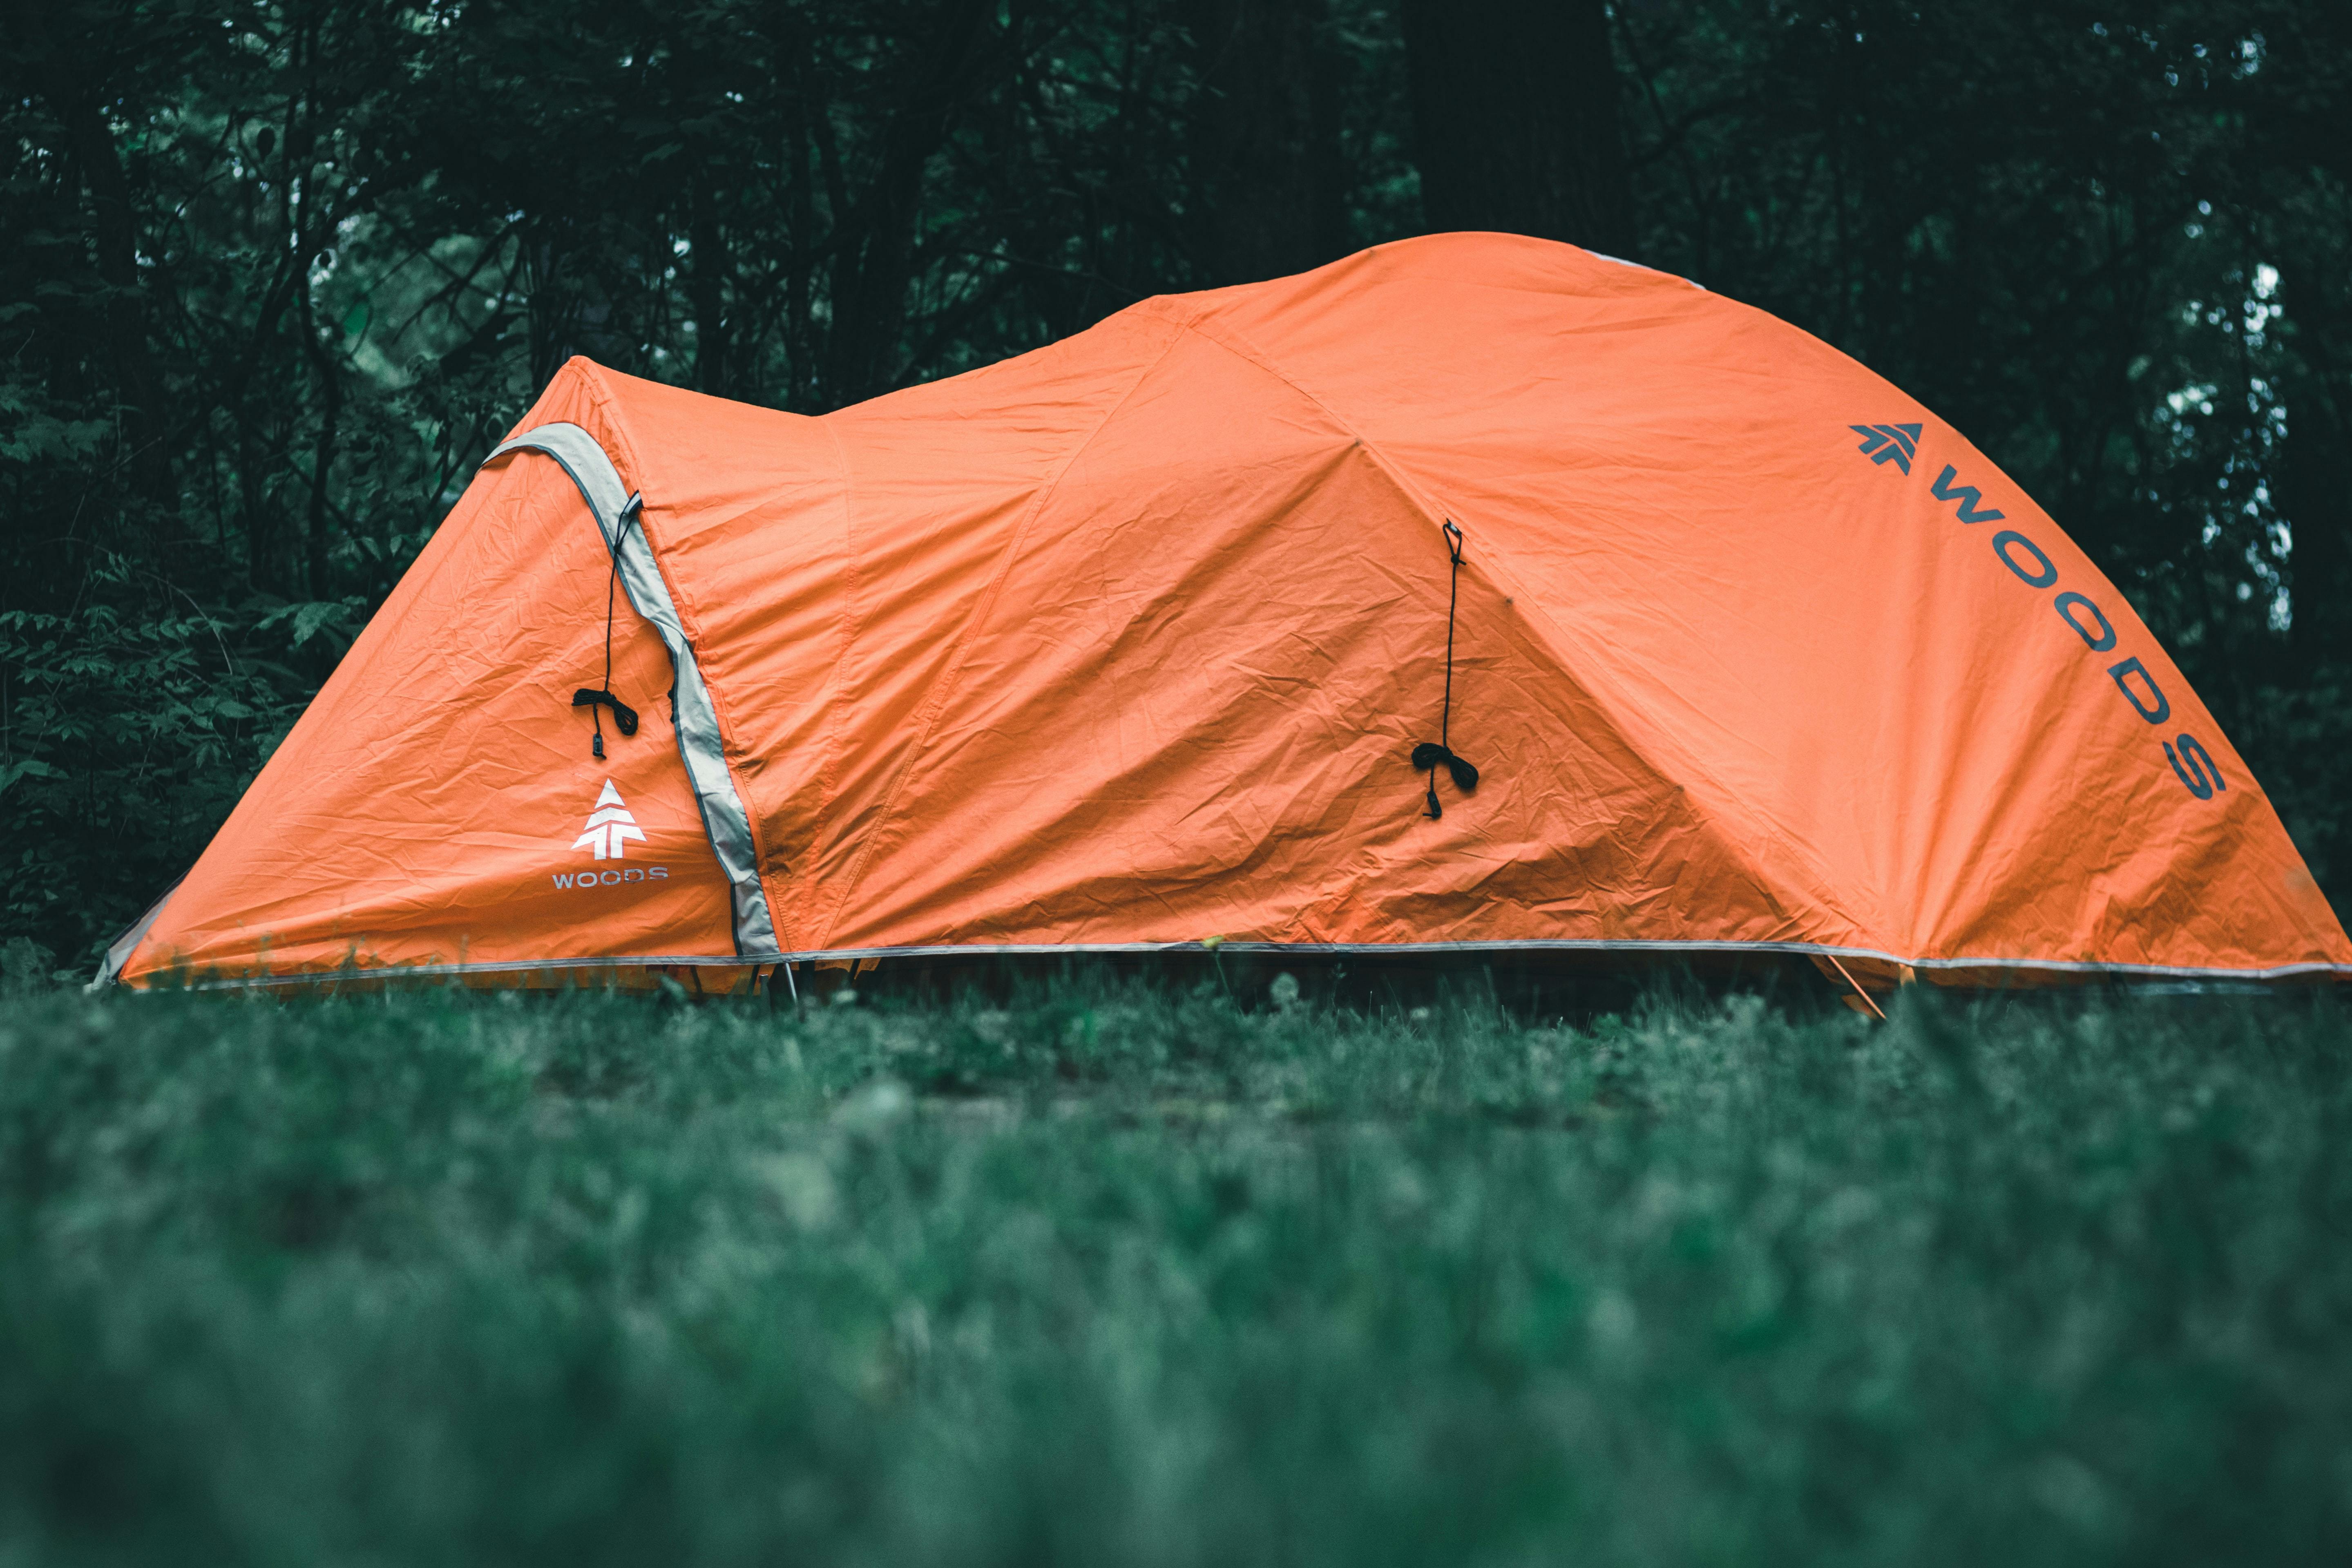 39+ Thousand Camping Gear Royalty-Free Images, Stock Photos & Pictures